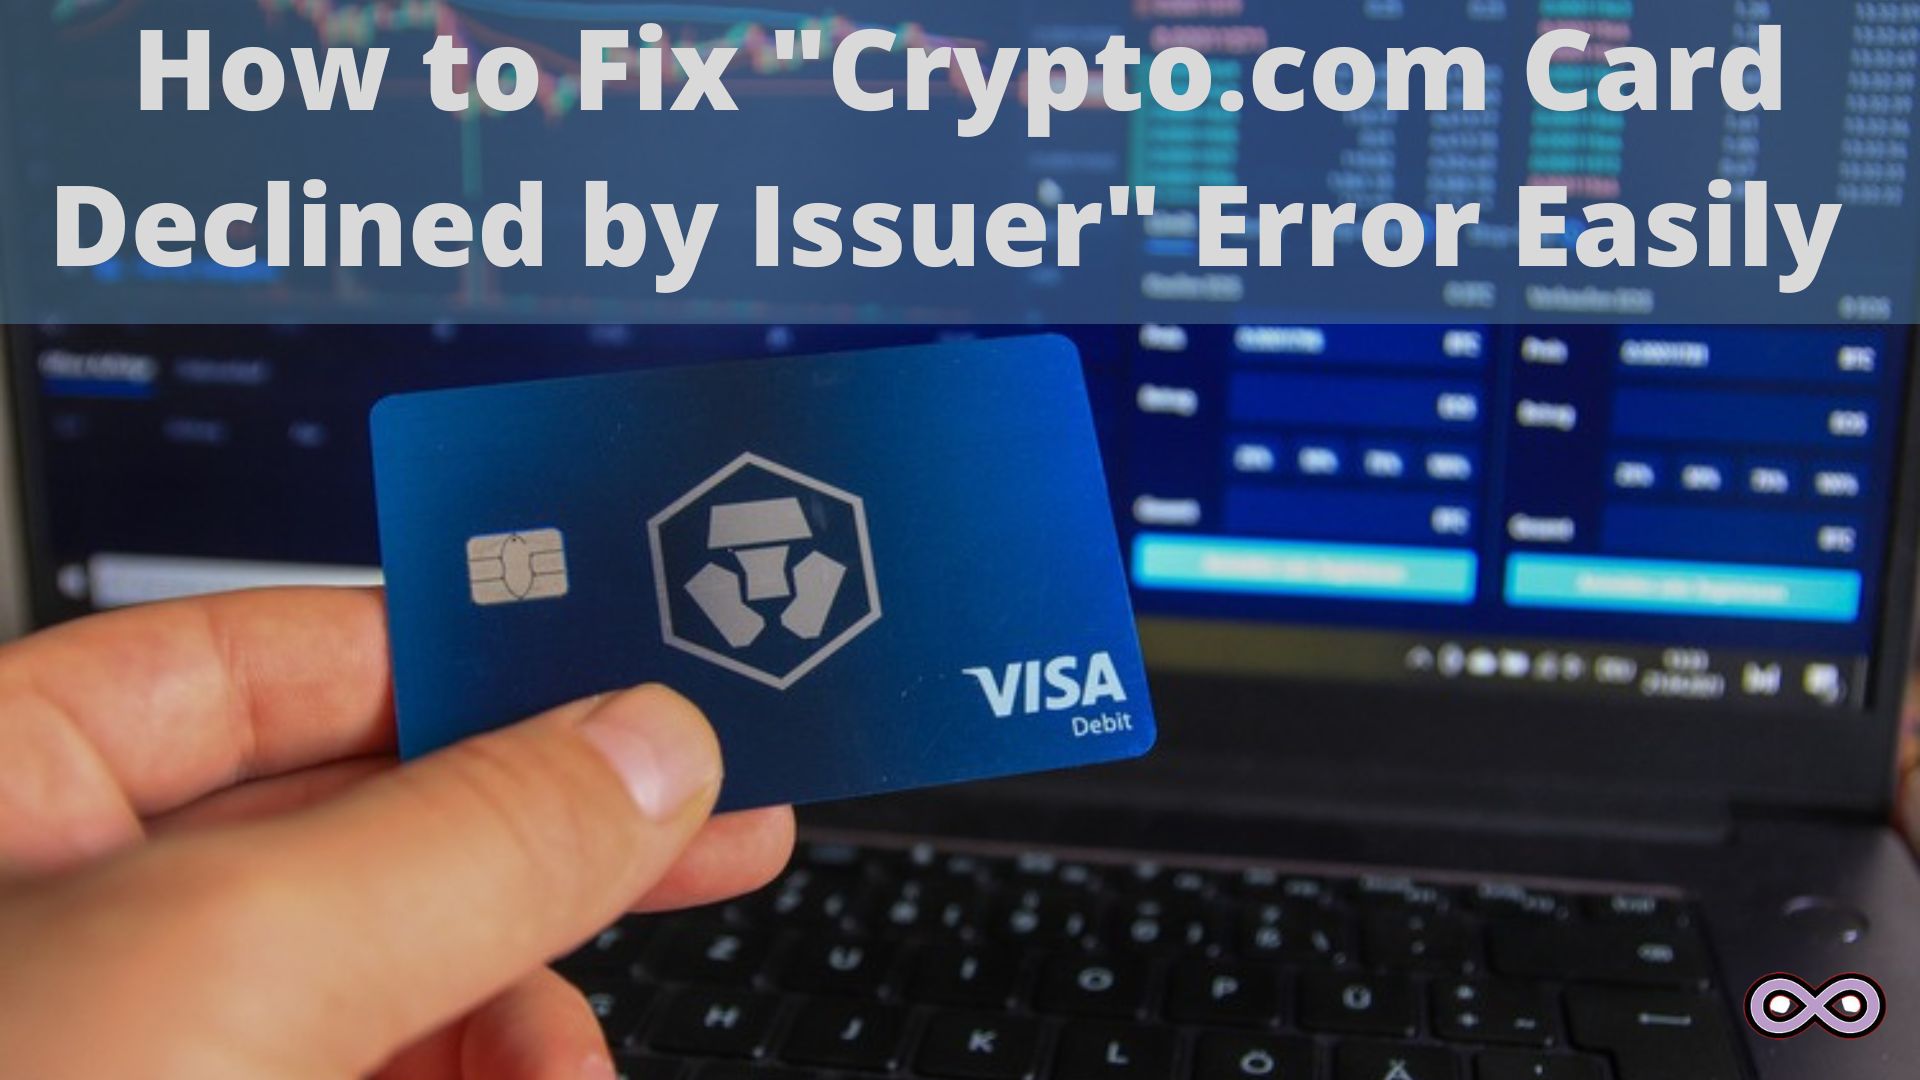 why does my credit card keep getting declined on crypto.com